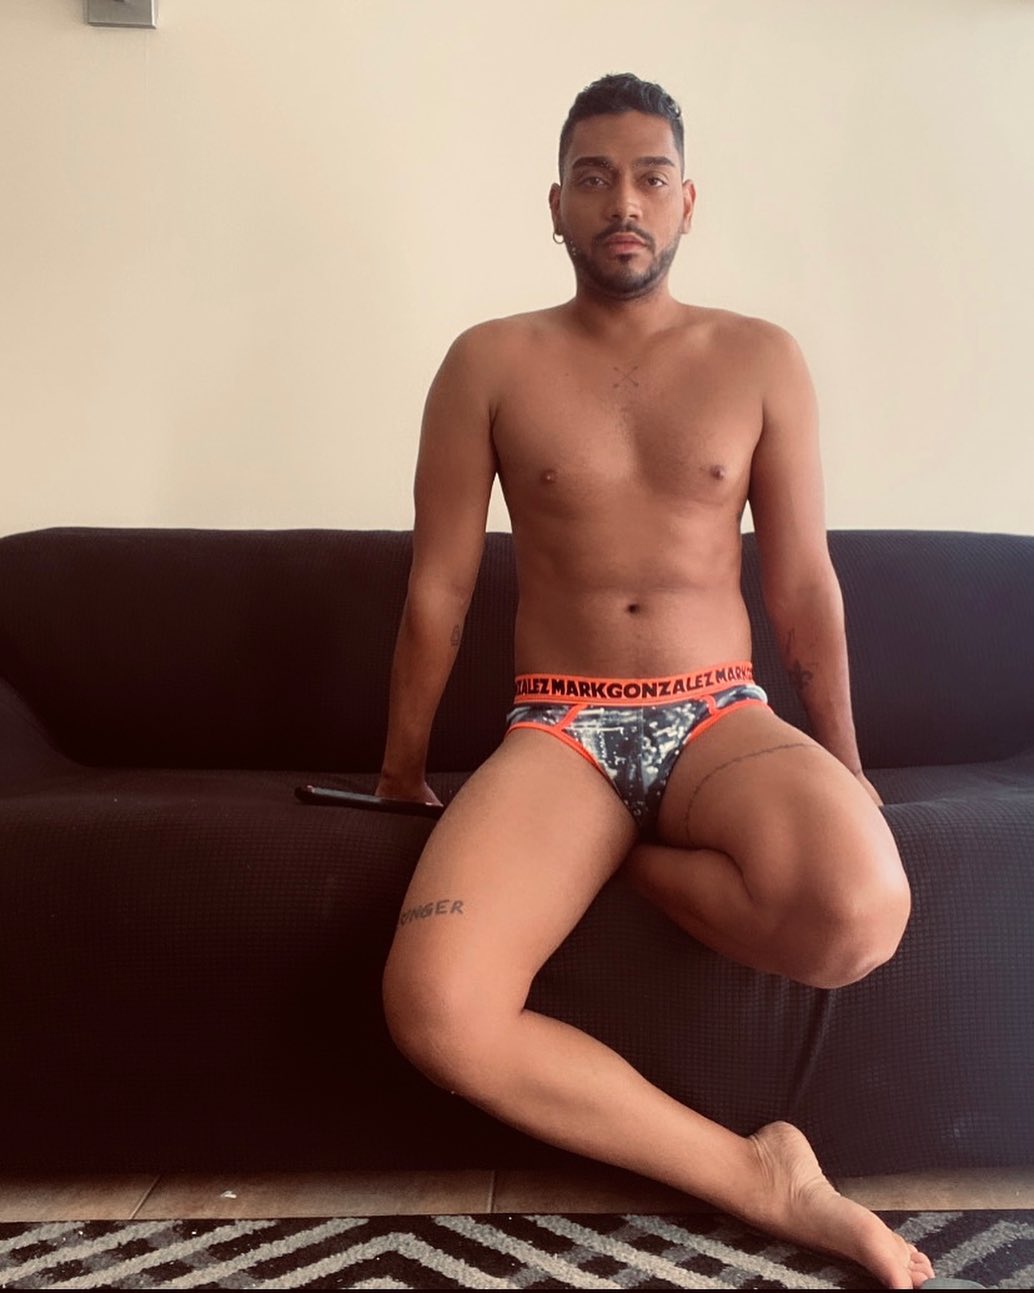 Its timeee 😌👌🏾 #hello #life #picoftheday #photooftheday #bodytransformation #sexy #dayoff #libre #free #cuerpodeplaya #loveme #sure #gayboyssex #gayboy #pride #gorgeous #instagay #instagramers #igers #relaxtime #bestoftheday #nudeselfies #nudeshoot #habdsomegay #bomdia #brasilian #followforfollowback #onlyfans #onlyfansfree